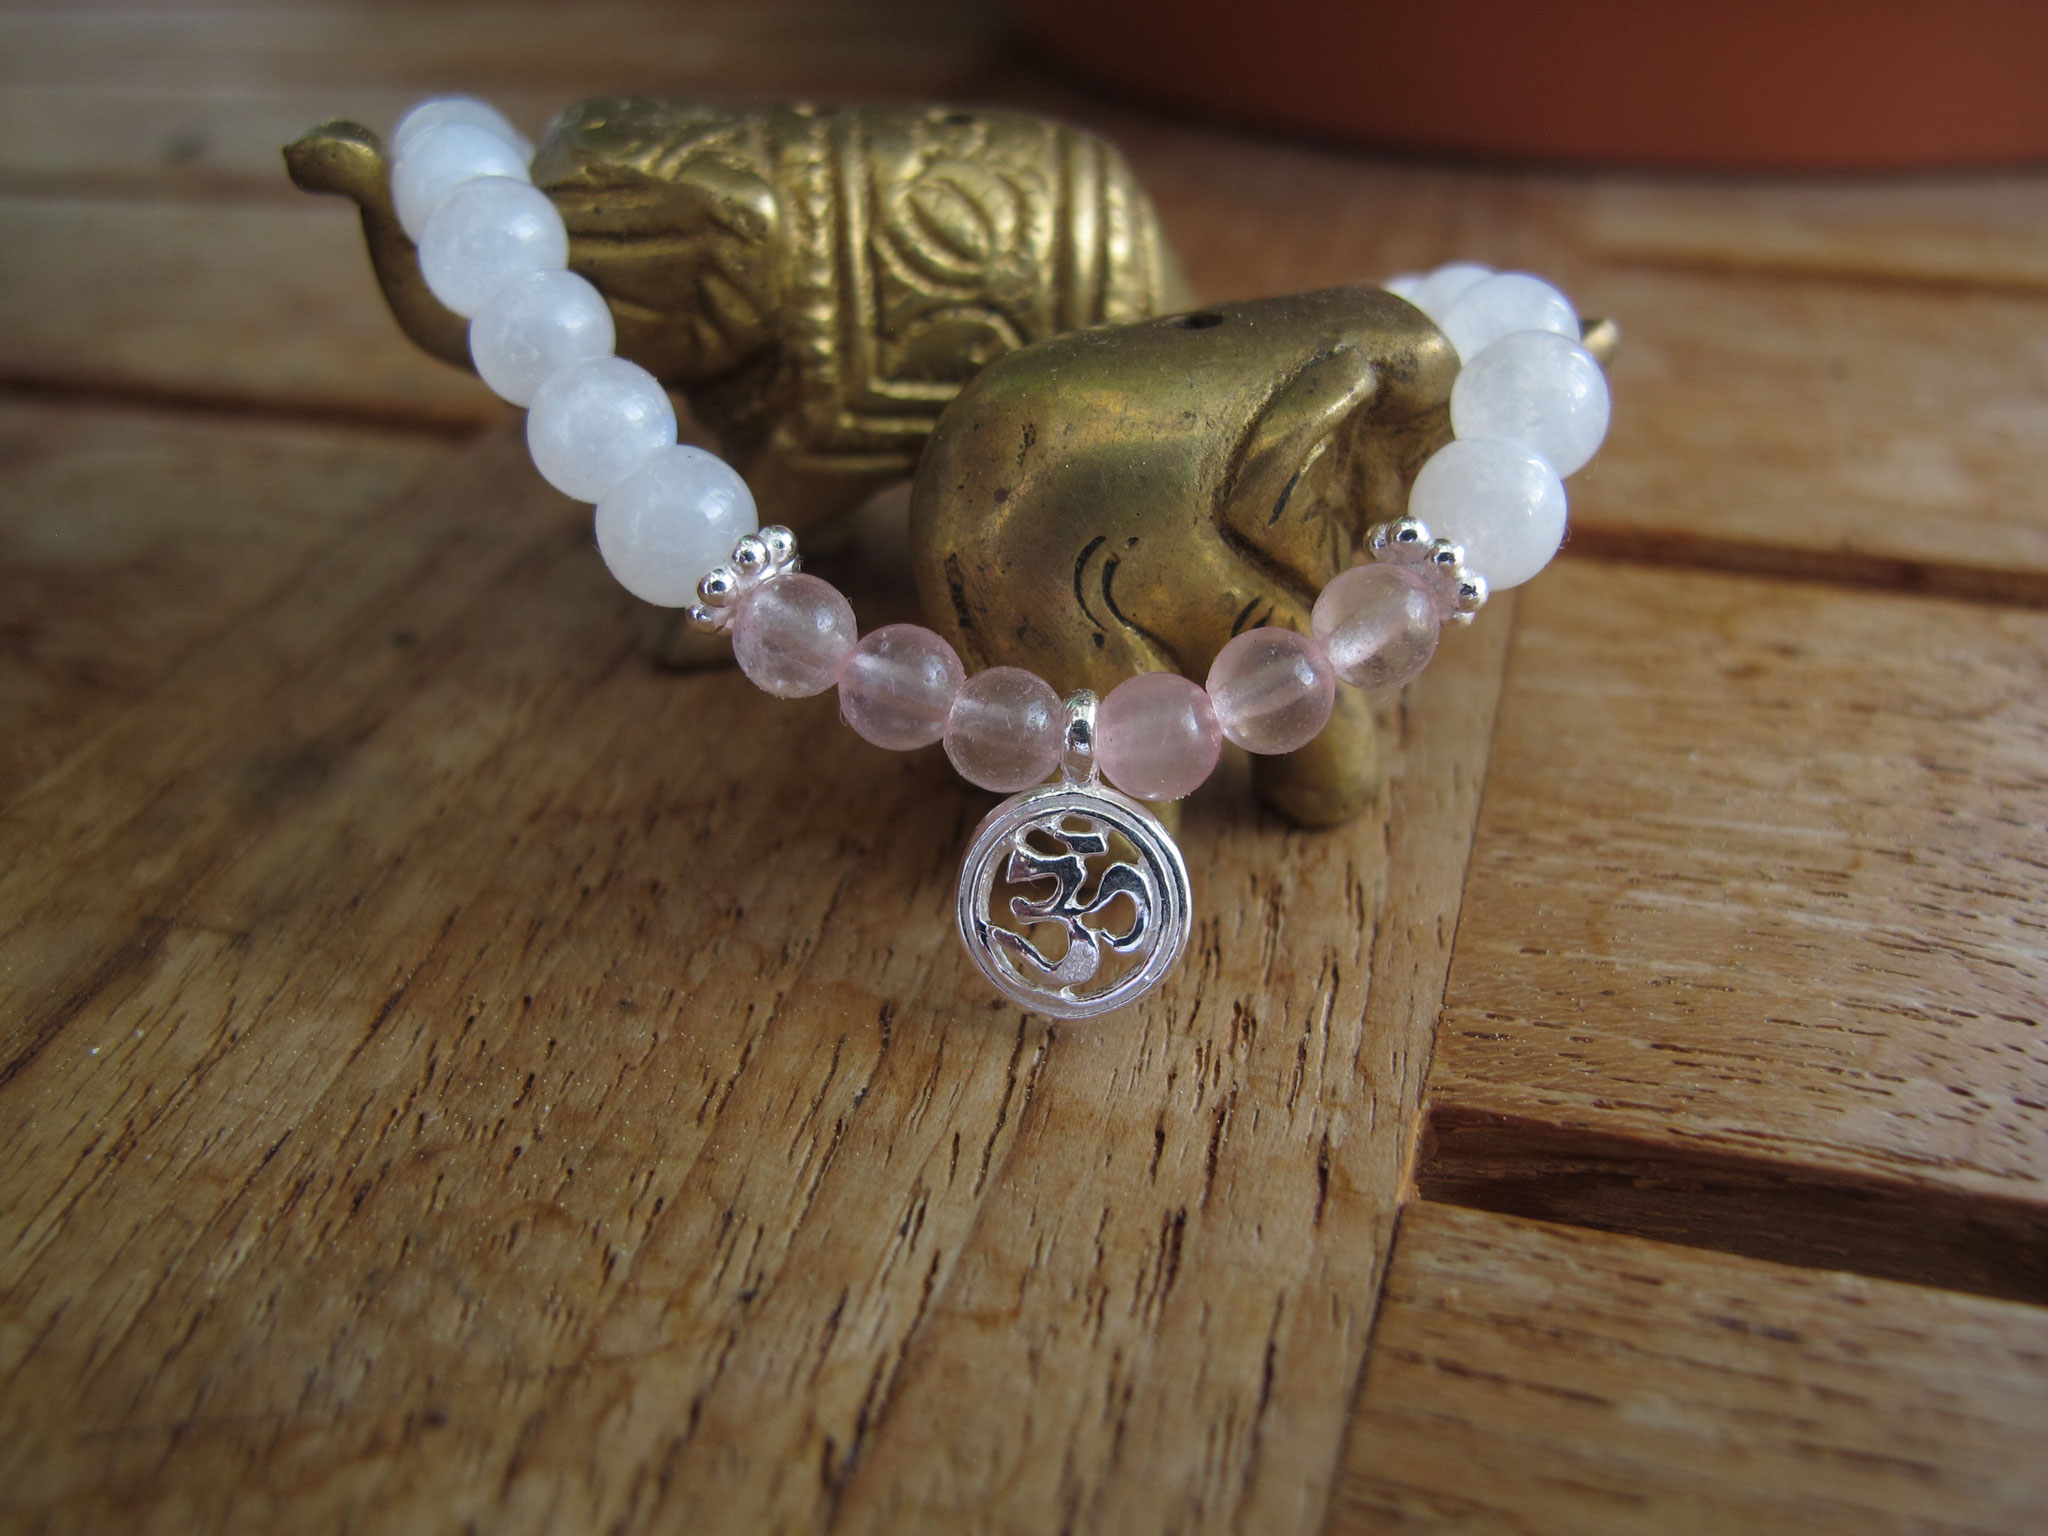 Moonstone with the lovely rose quartz, enhanced with a 925 Sterling silver "OM" charm and elements (sold)